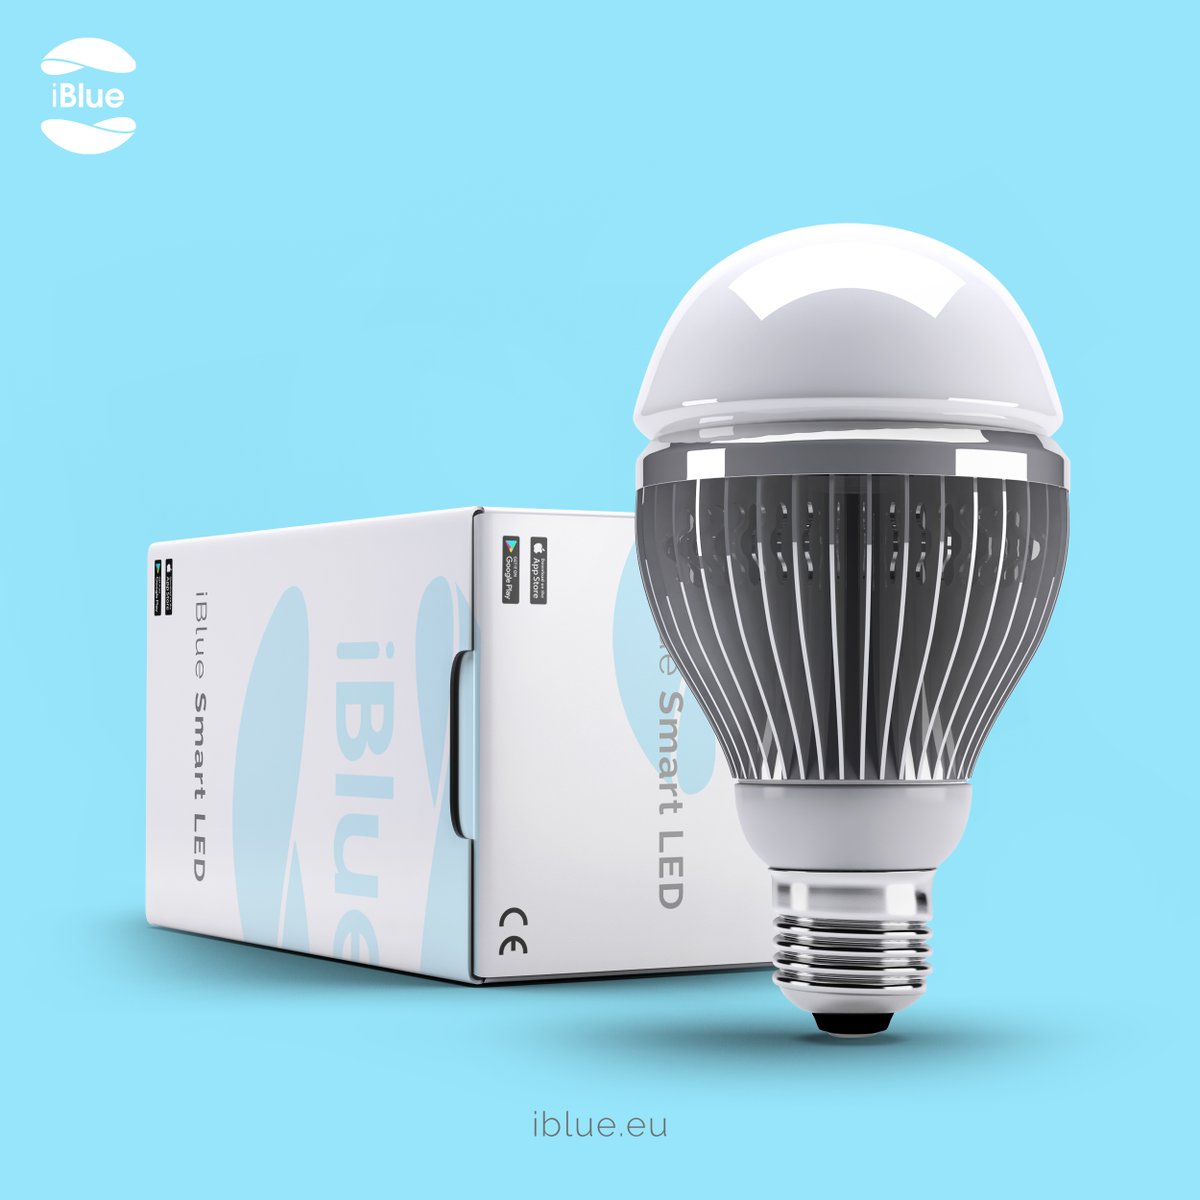 iBlue Smart LED - iblue.eu/iblue-smart-le…

iBlue creates app-powered lifestyle accessories that entertain and enlighten. We combine elegant software with innovative hardware, designed and developed by iBlue engineering and product teams in Switzerland.

The iBlue Light app offers…